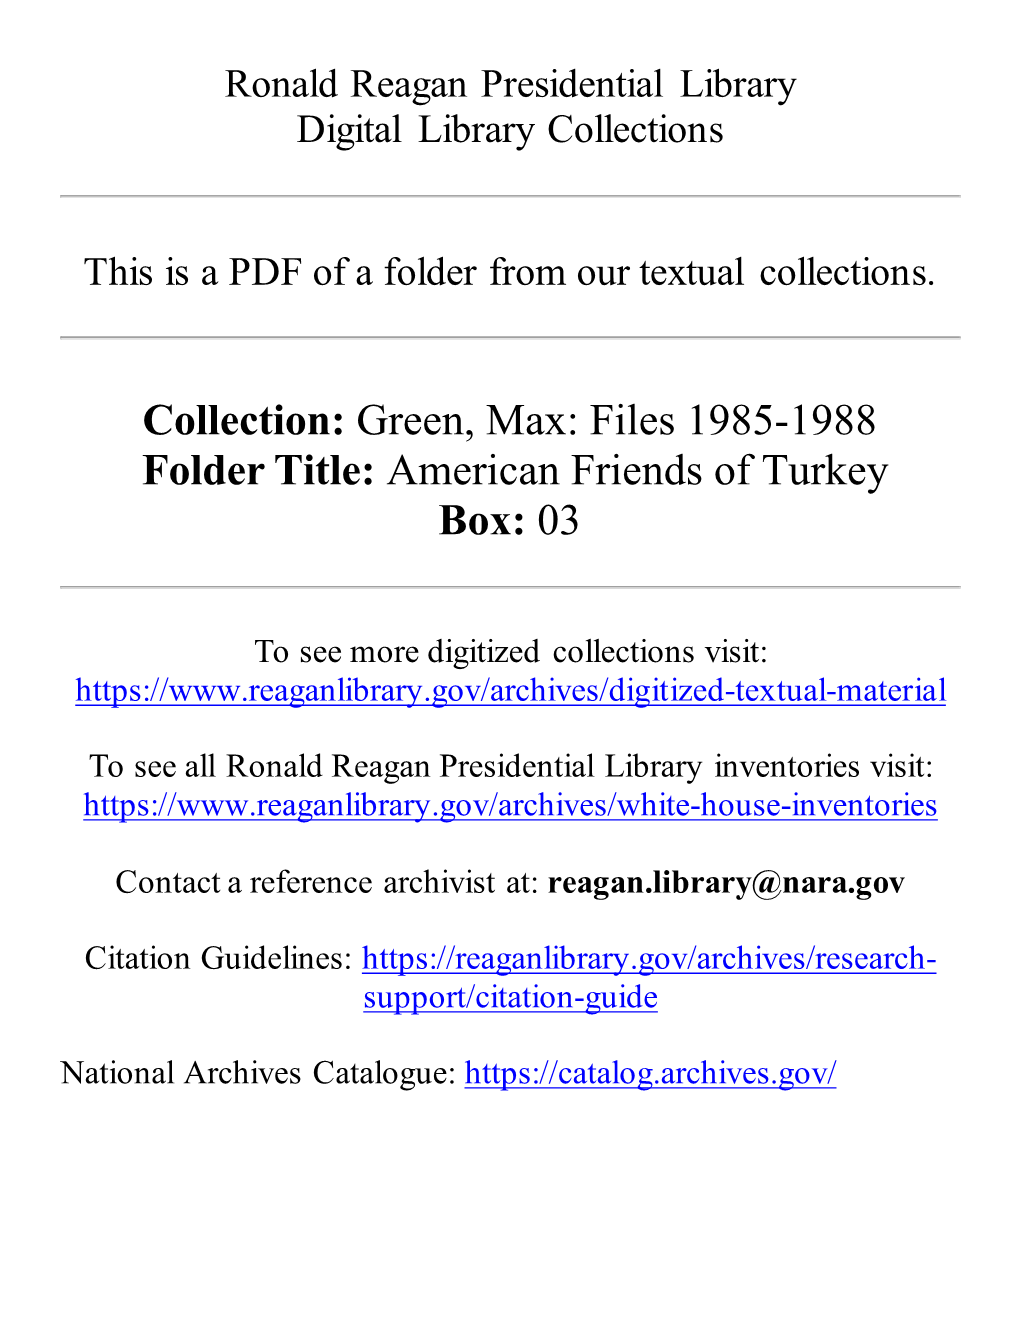 Collection: Green, Max: Files 1985-1988 Folder Title: American Friends of Turkey Box: 03